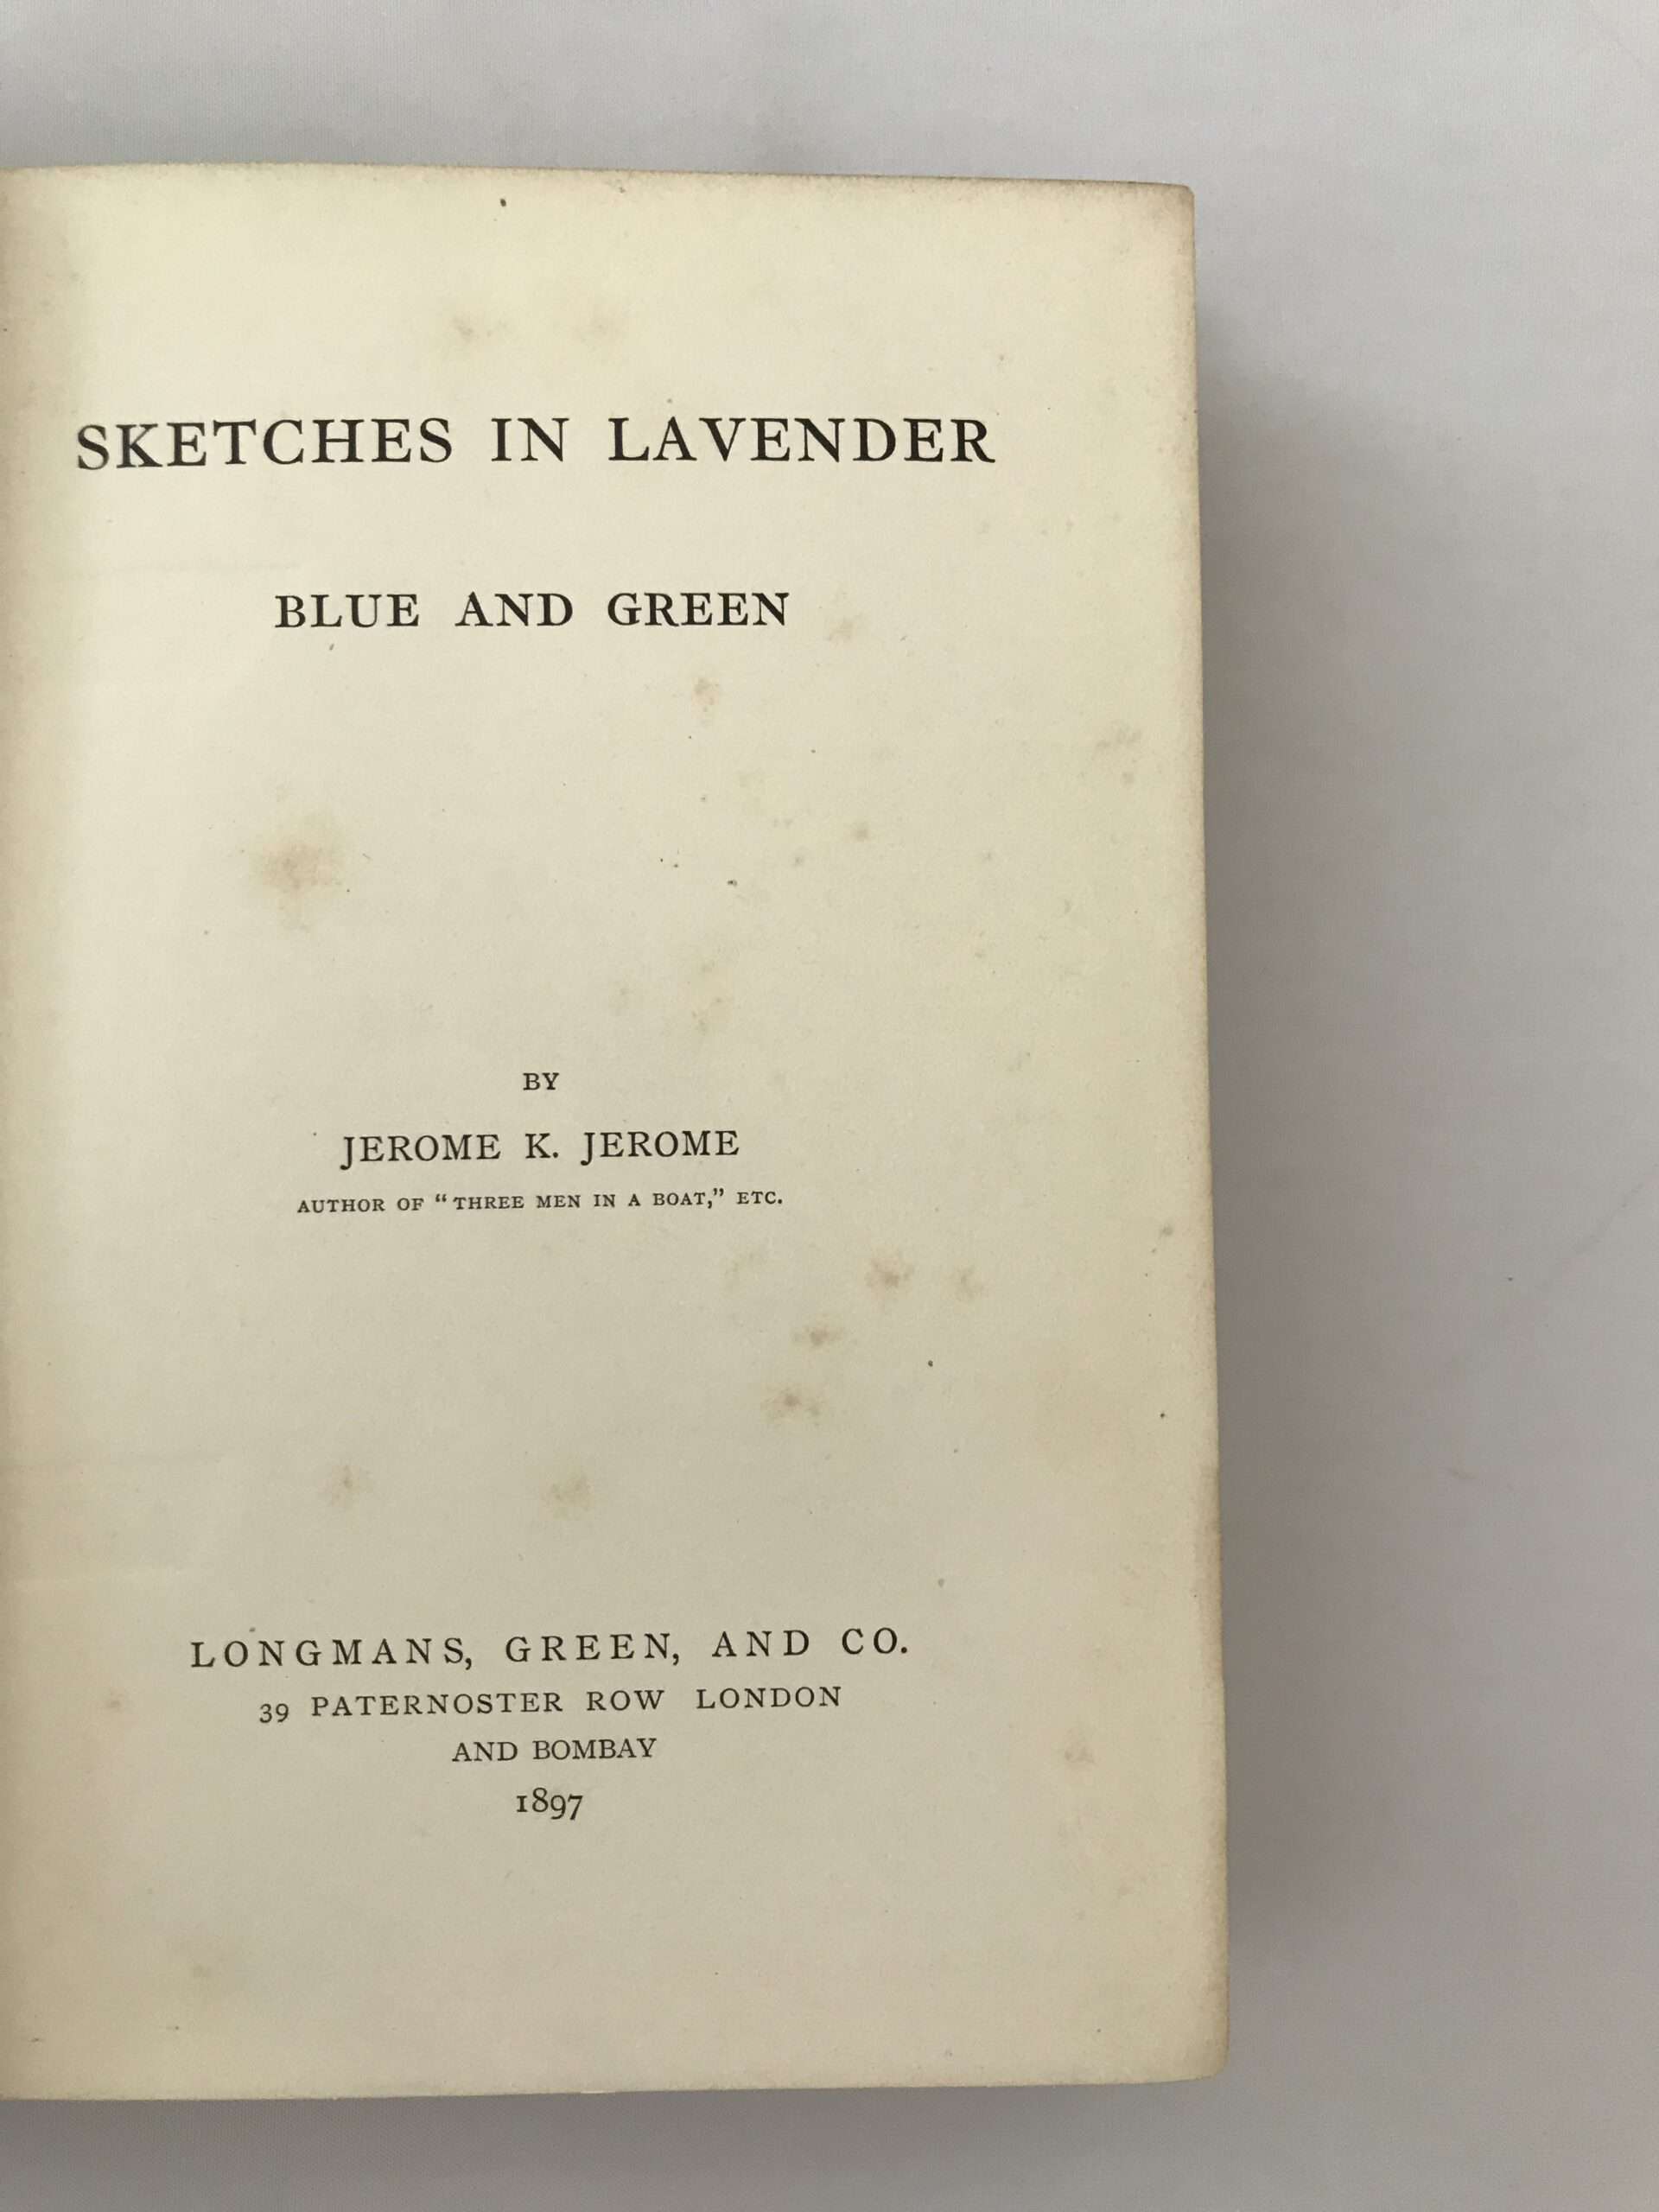 jerome k jerome sketches in lavender blue and green first edition2